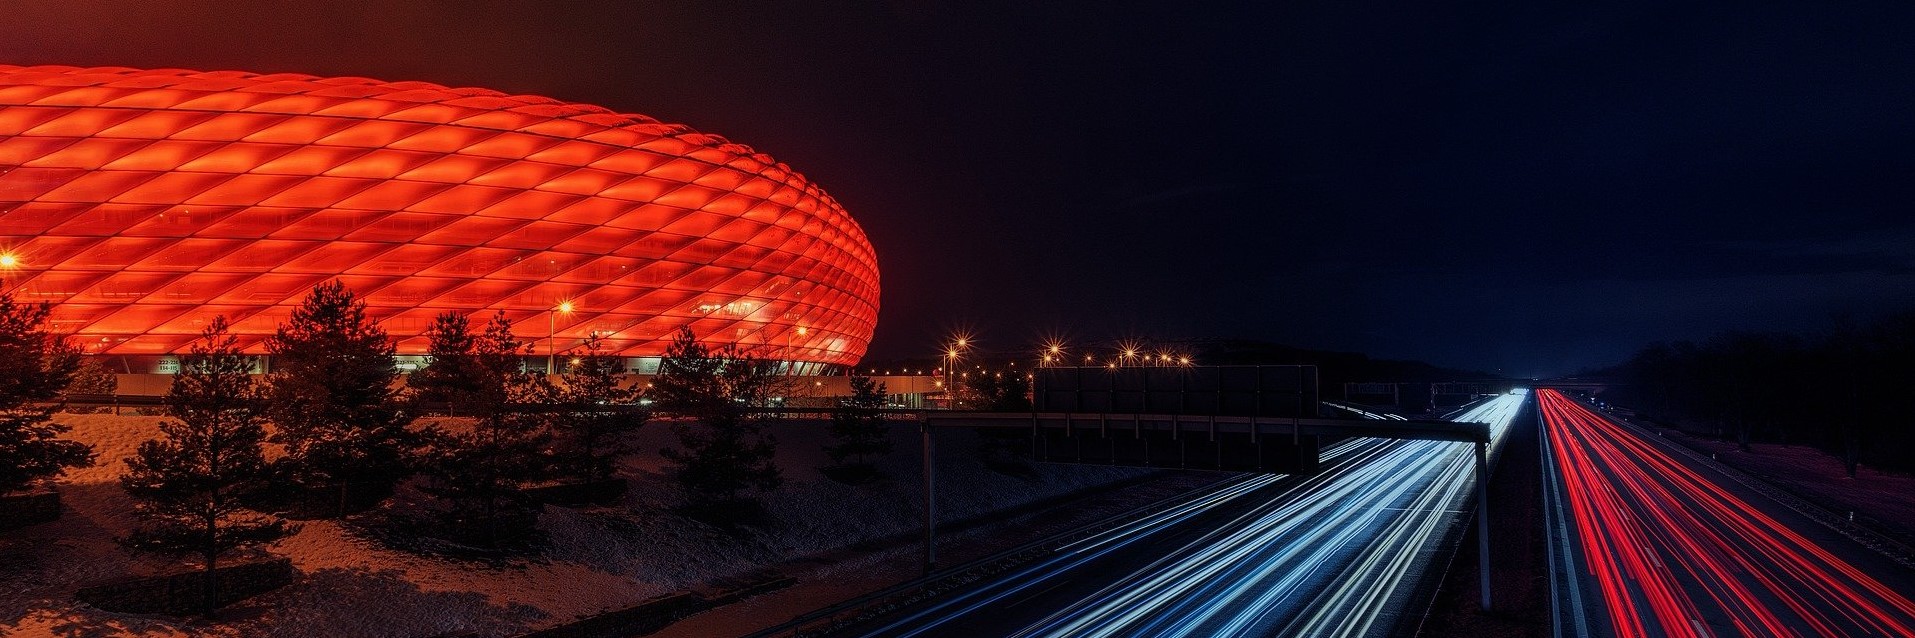 A football stadium lit up in red at night next to a fast moving road